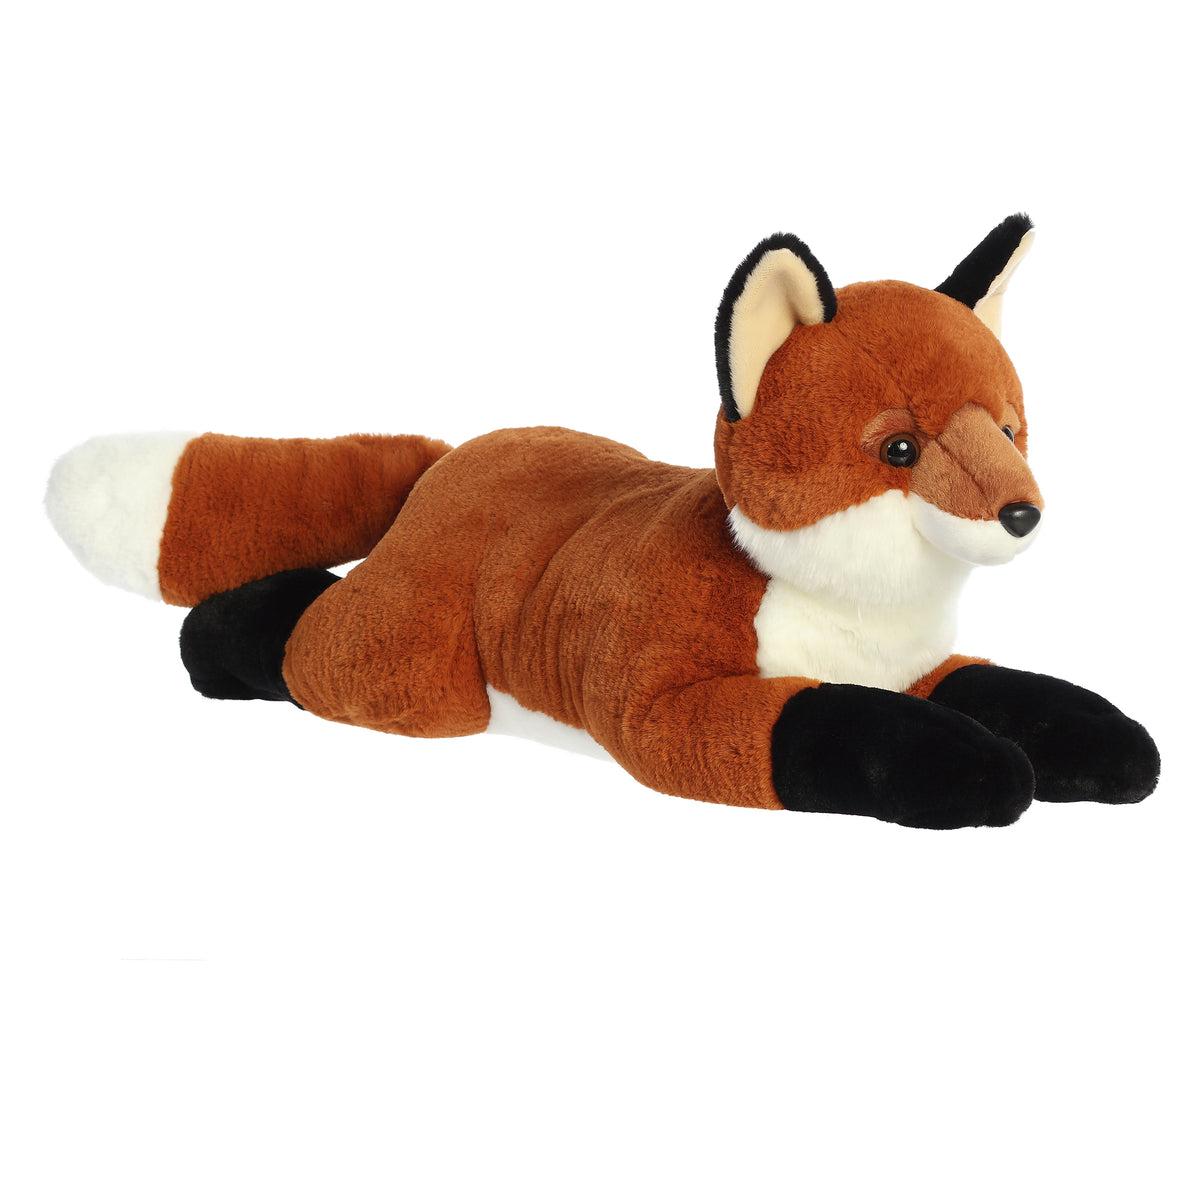 A Fox plush with deep orange and white coloring and black feet from Aurora's Super Flopsie collection.